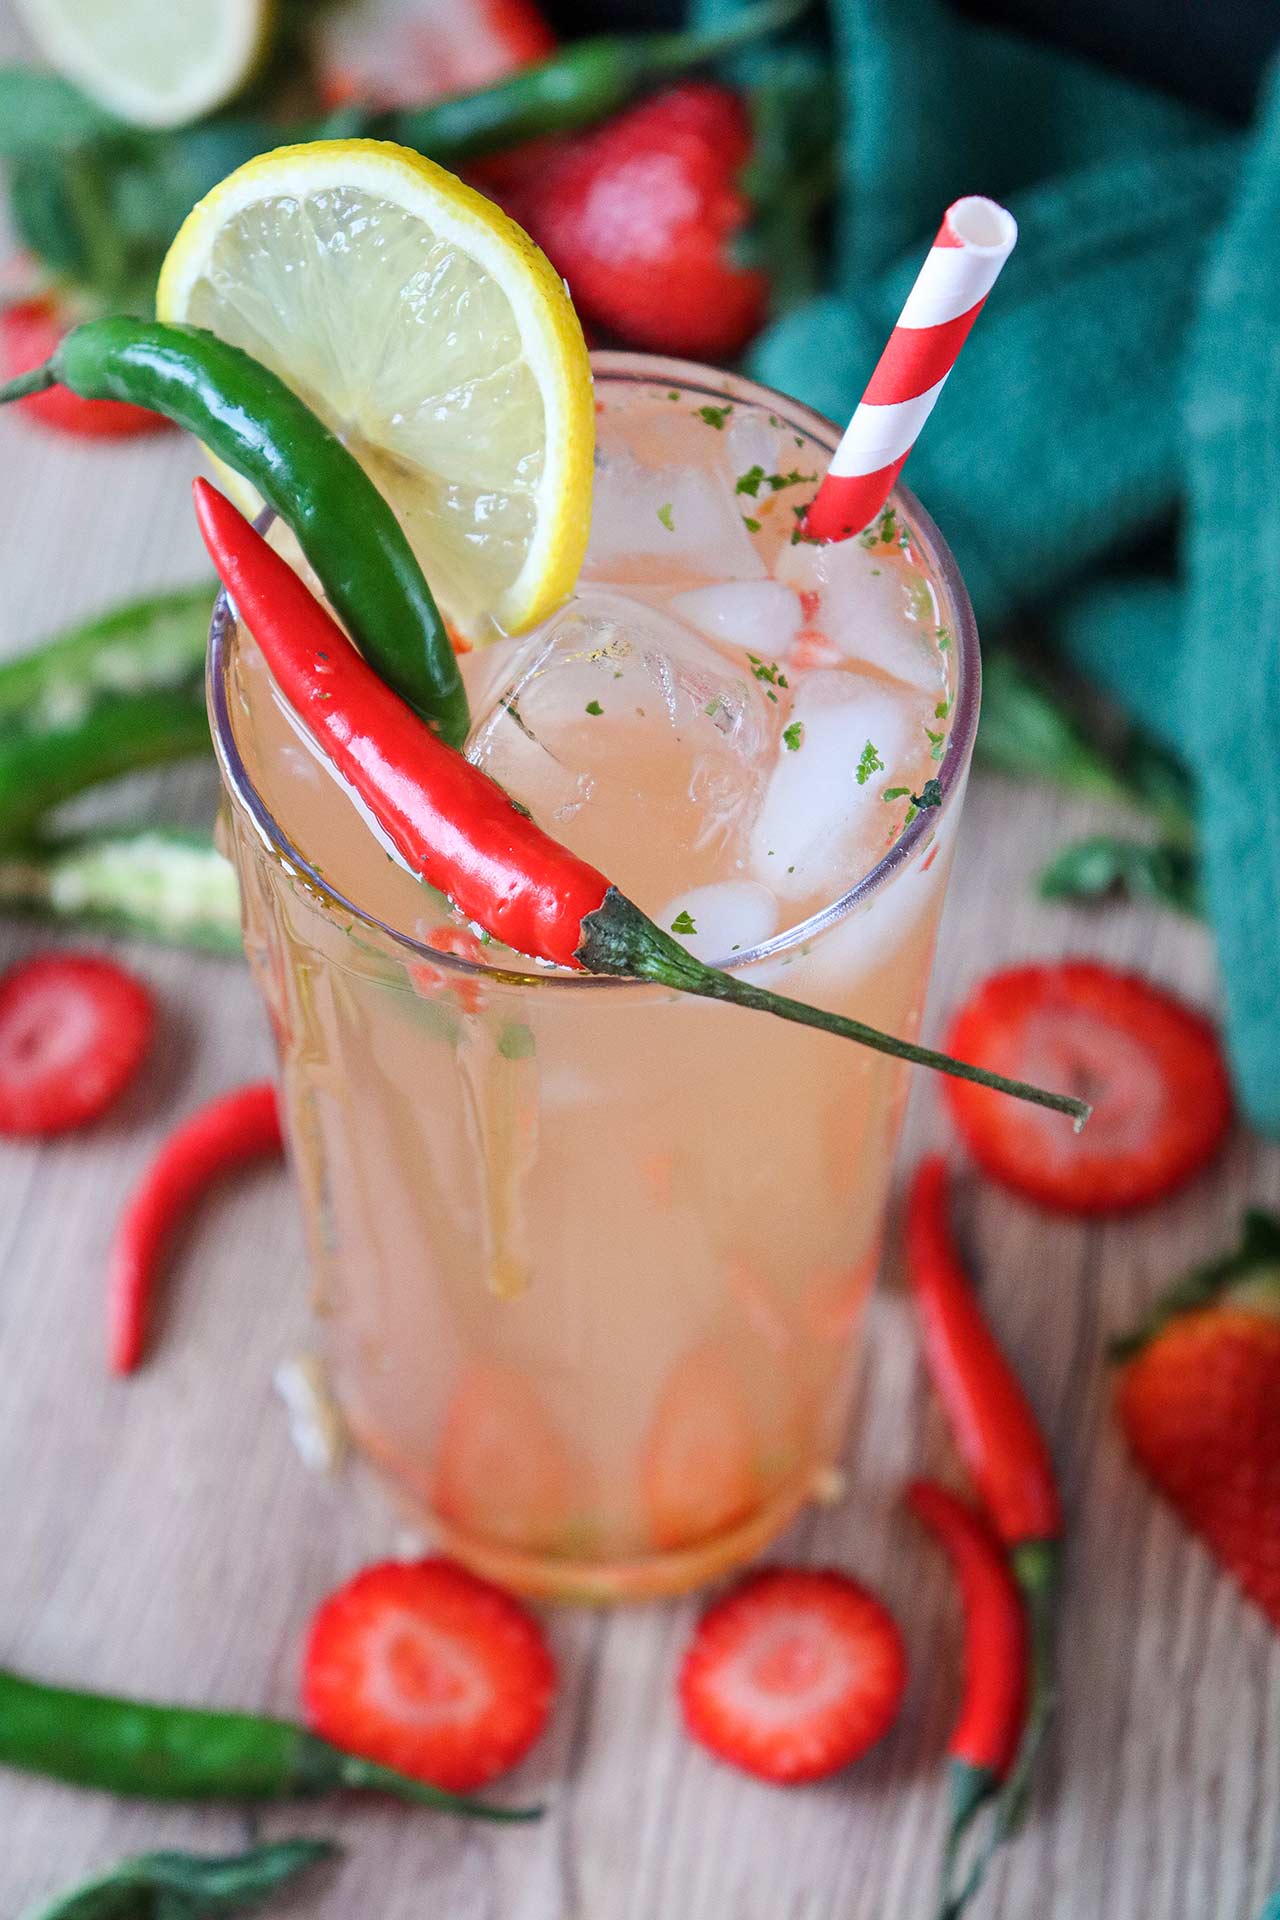 A semi-overhead view of a glass of strawberry mocktail garnished with peppers and a lime slice.